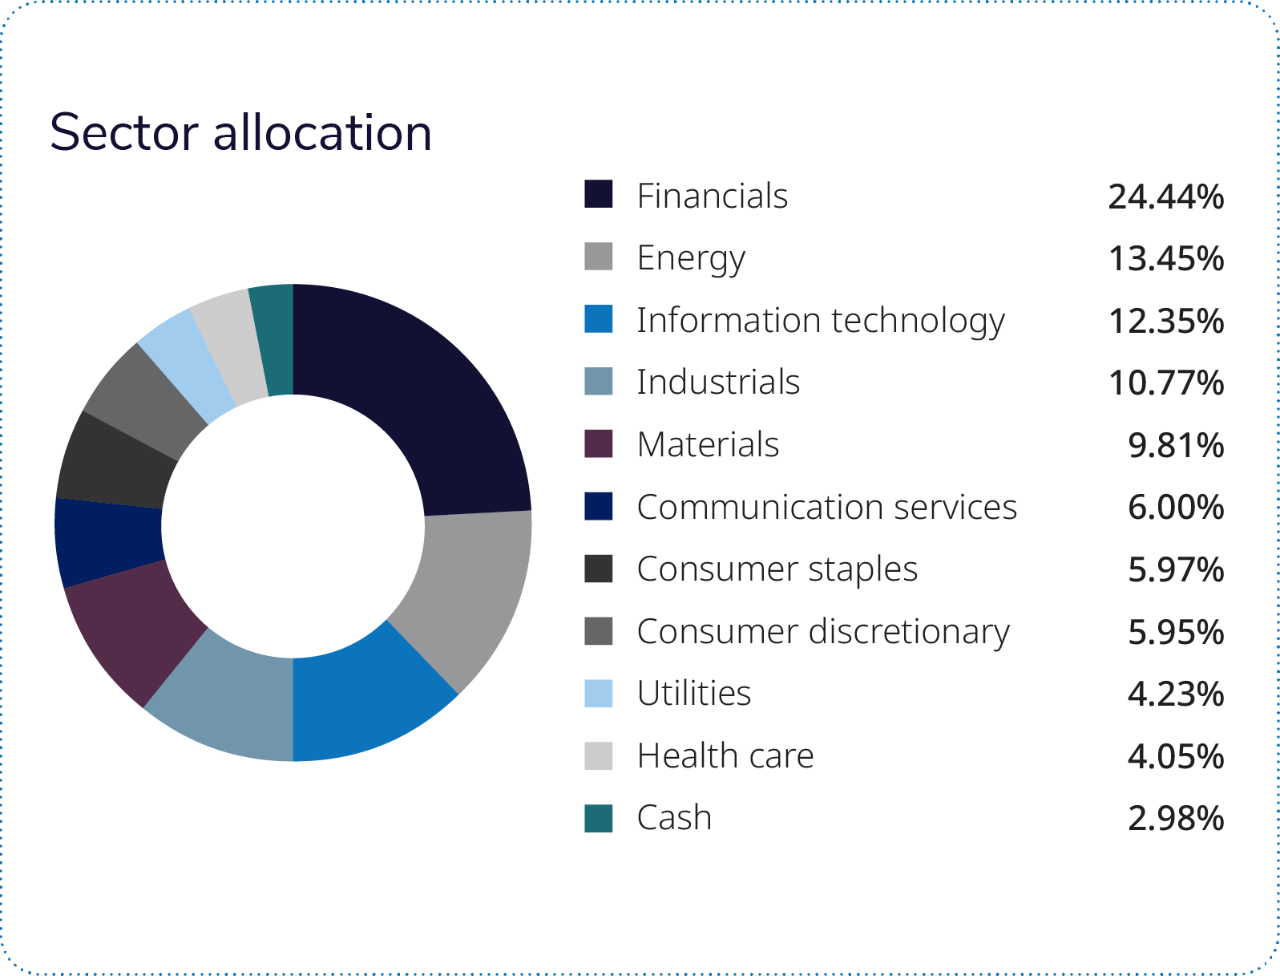 Almost two-thirds of the fund is comprised of four sectors: financials, energy, information technology and industrials. 